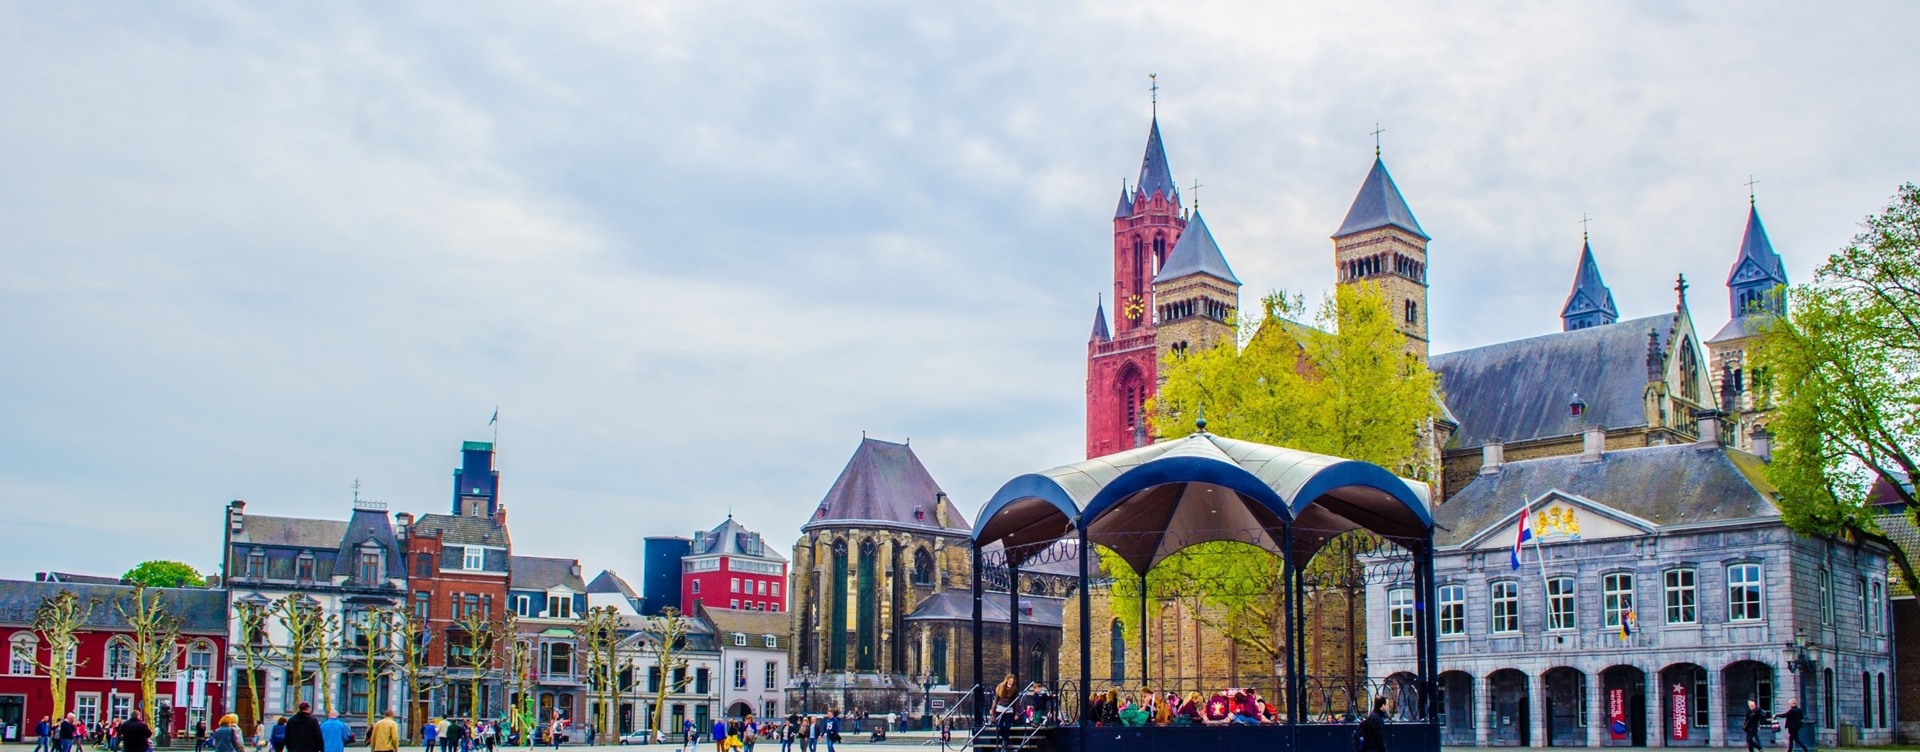 Explore the beautiful, vibrant surroundings of Maastricht 
during your hotel stay